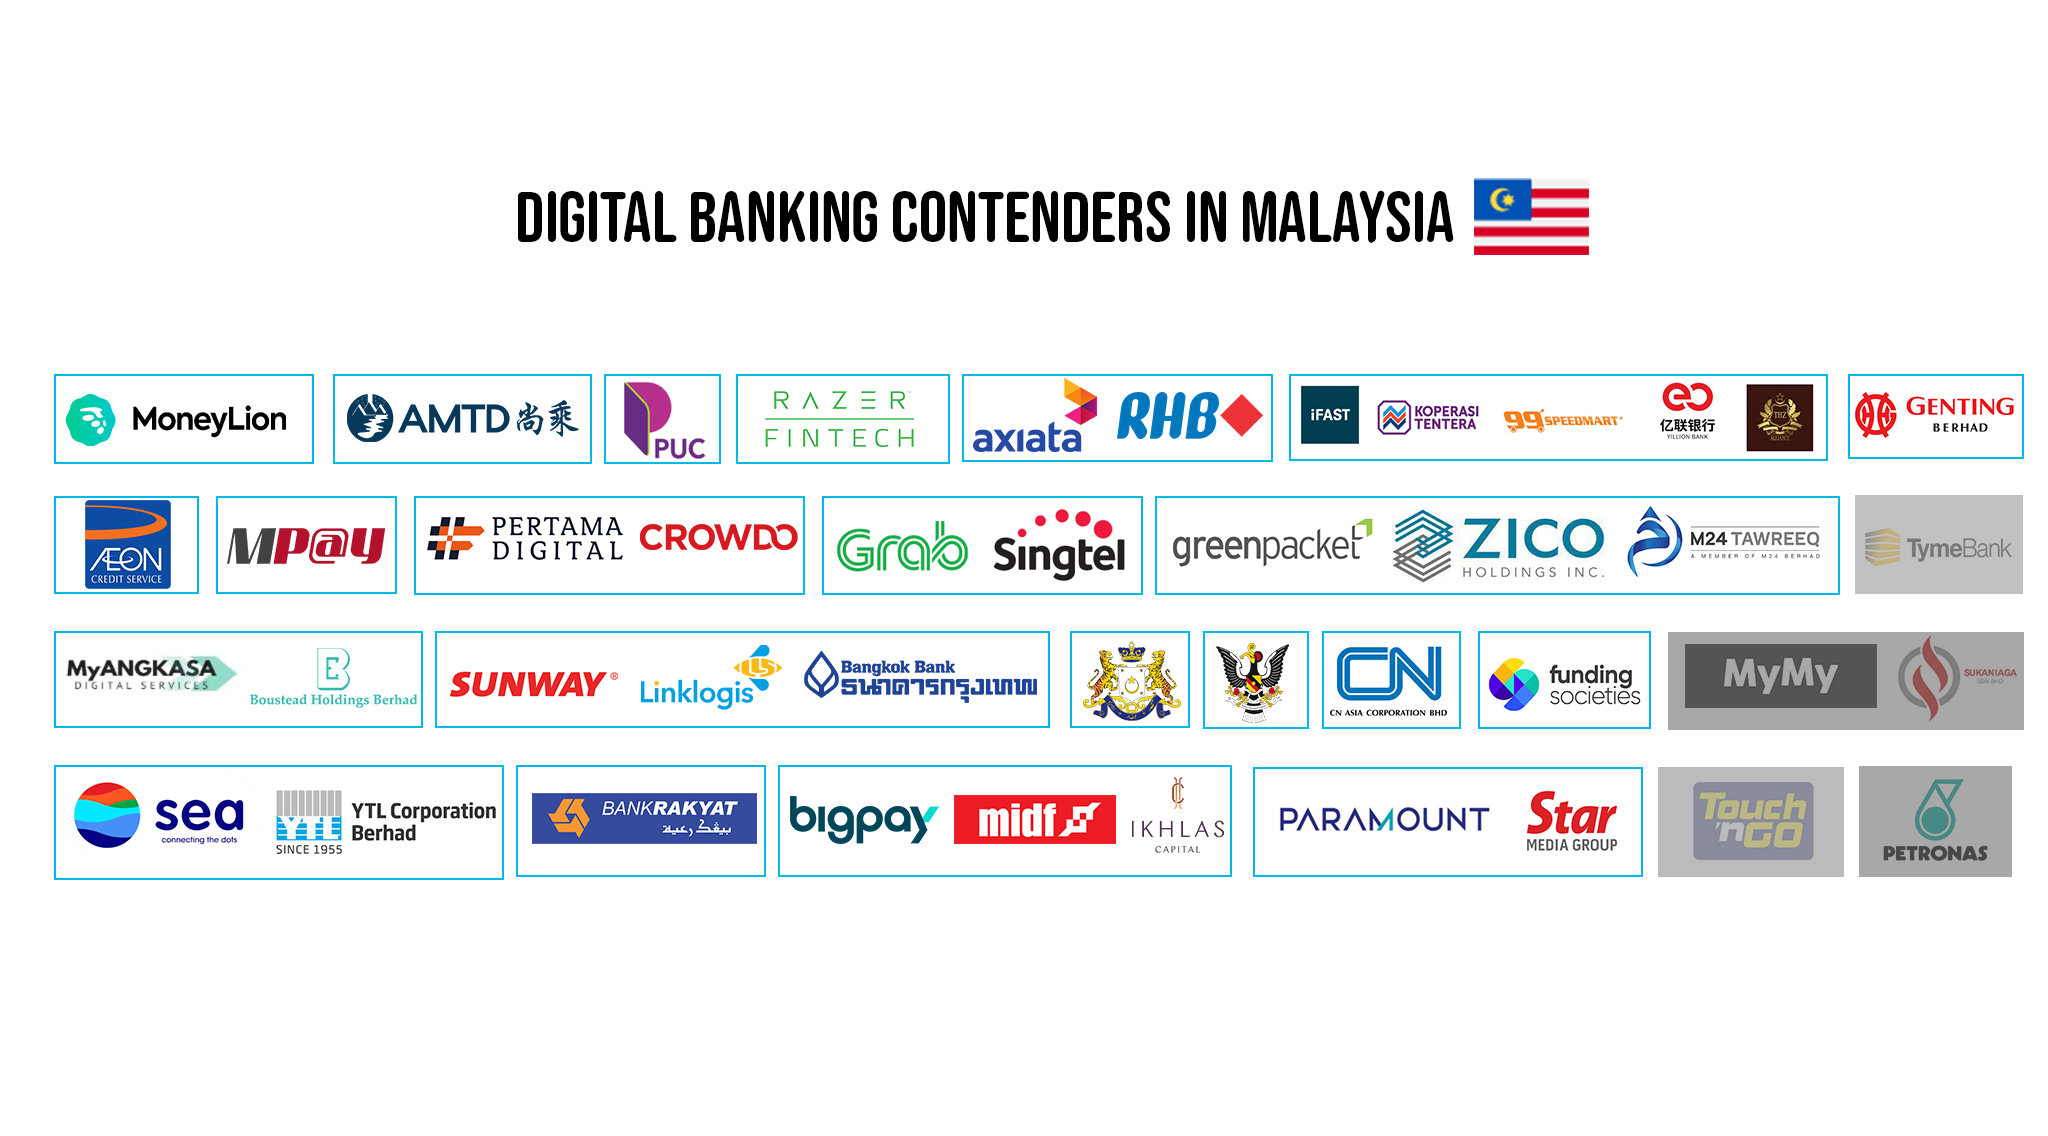 Digital Banking Contenders in Malaysia 5-7